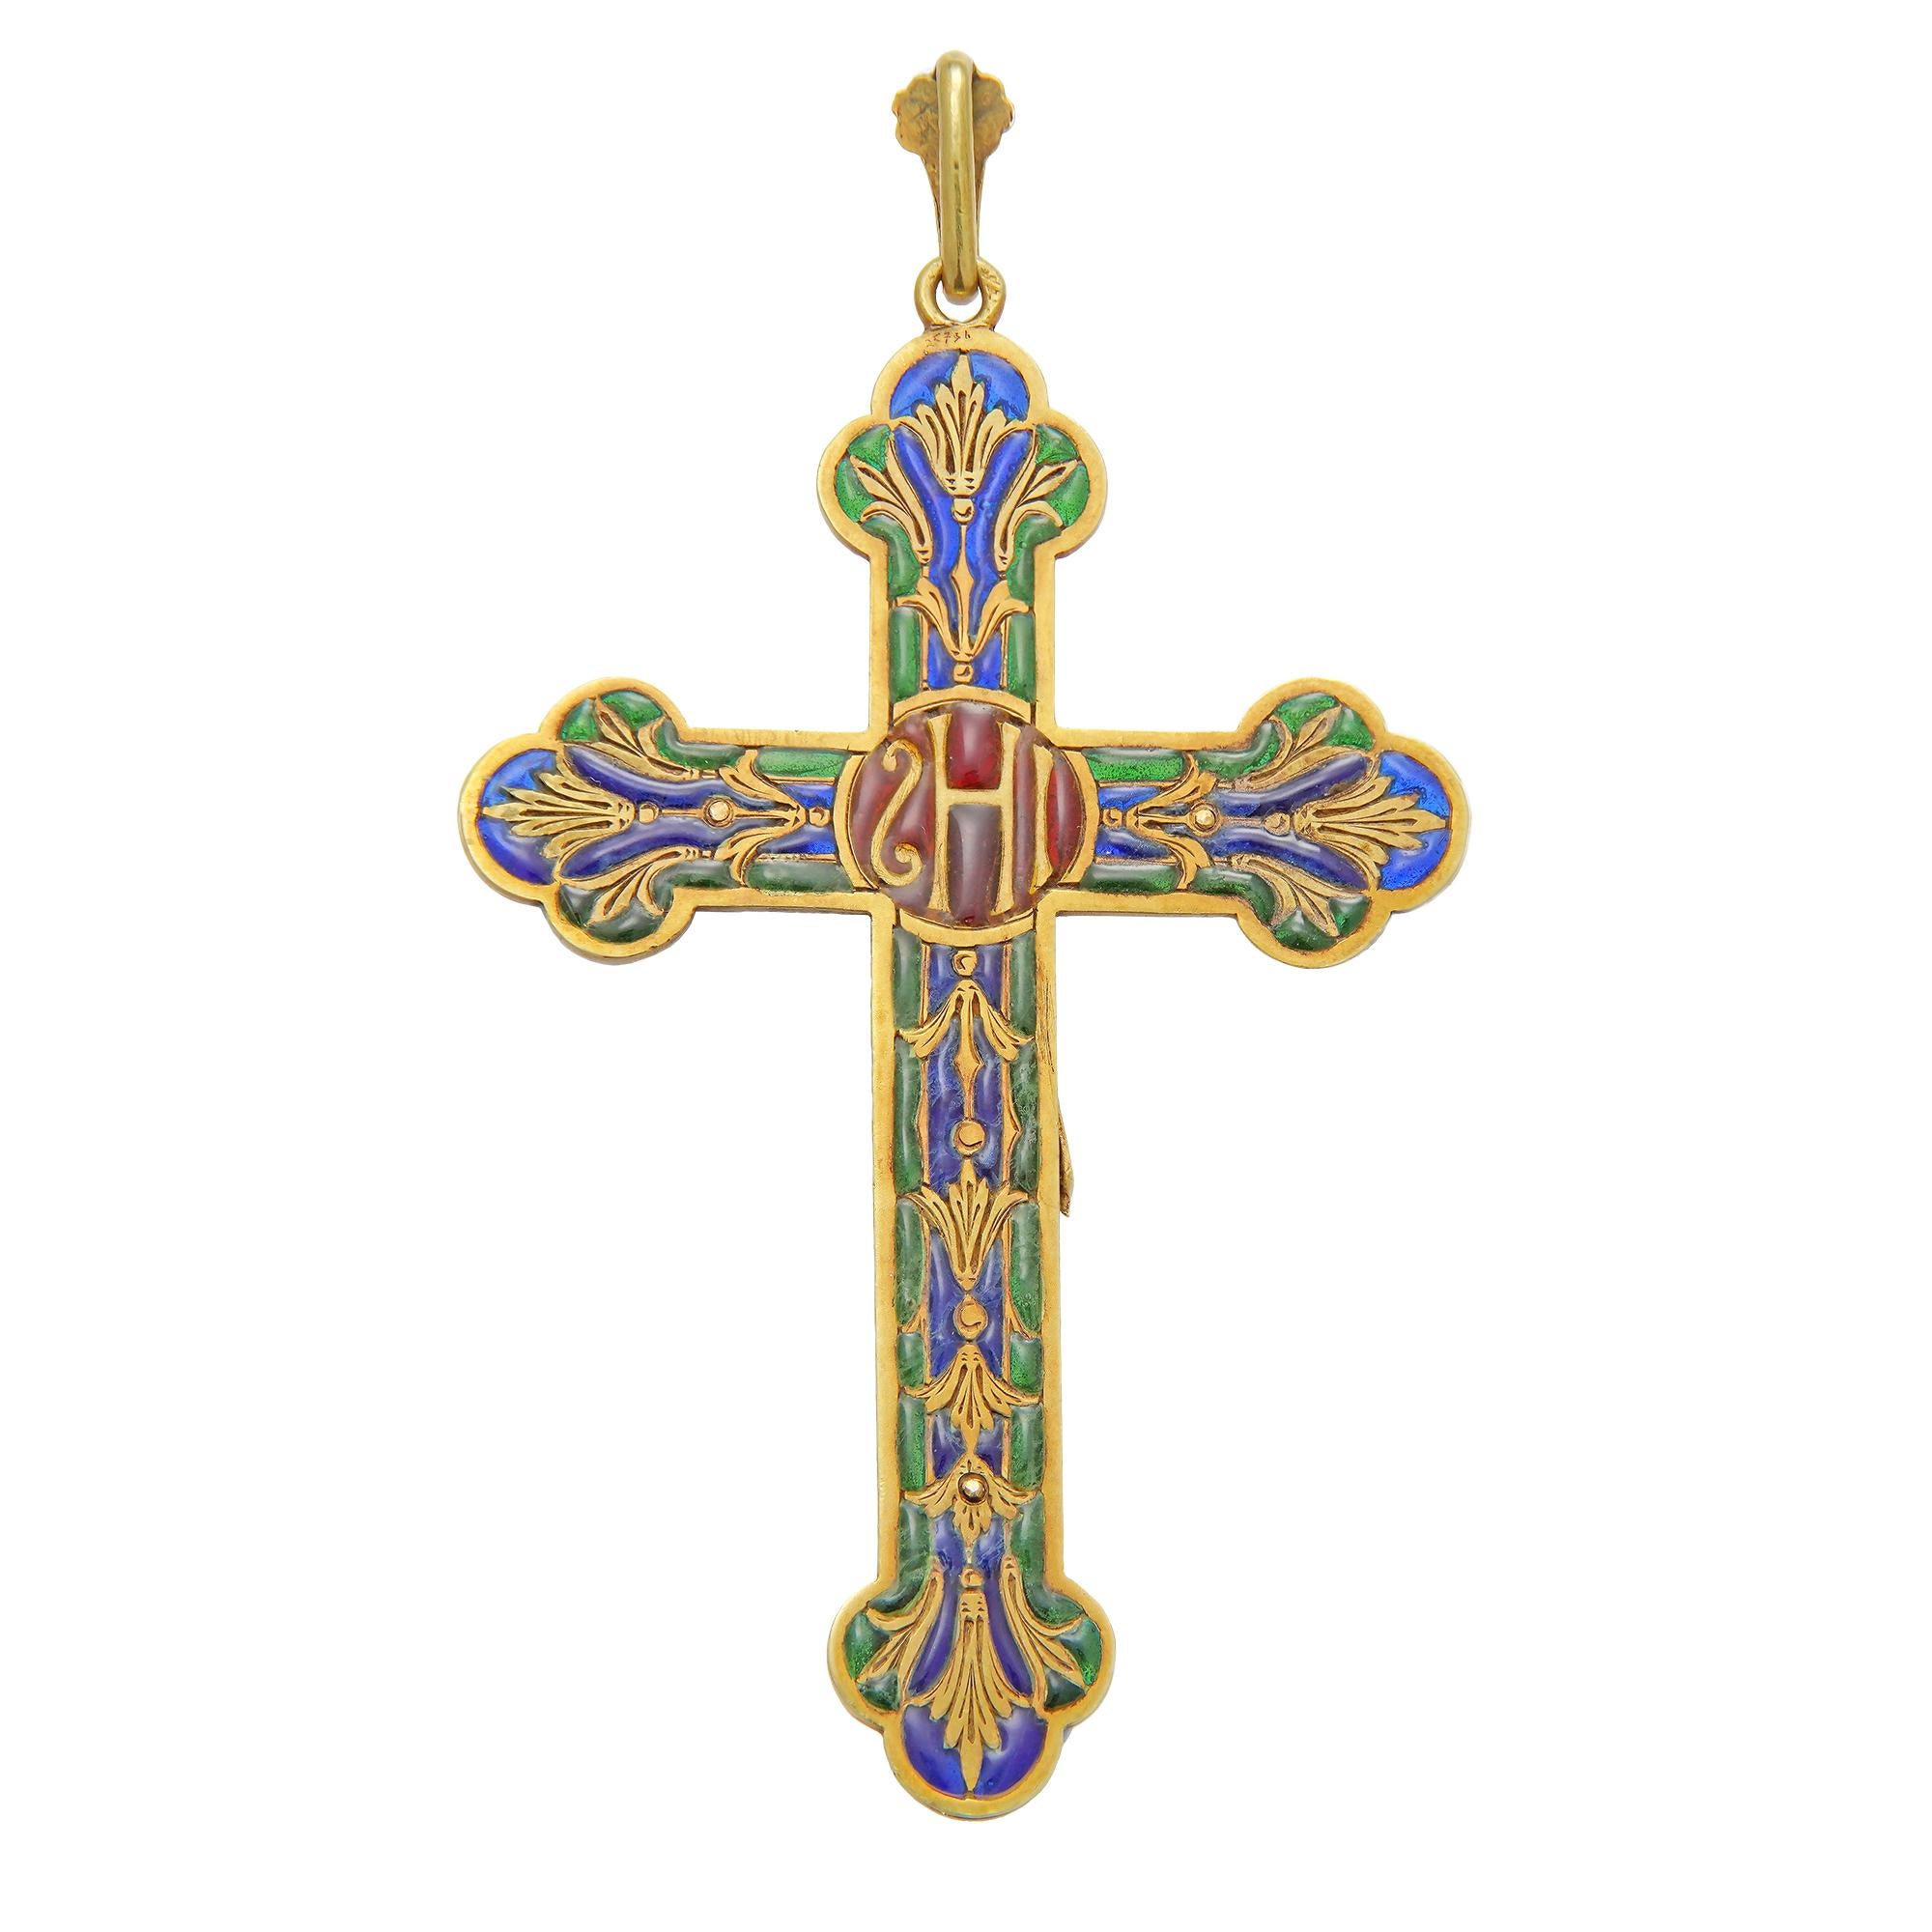 A French gold and enamel crucifix pendant in Renaissance style, the budded cross with applied modelled figure of Christ made in yellow gold, the cross to the centre bearing the Christogram HIS in gold with red plique-a-jour enamel, the arms of